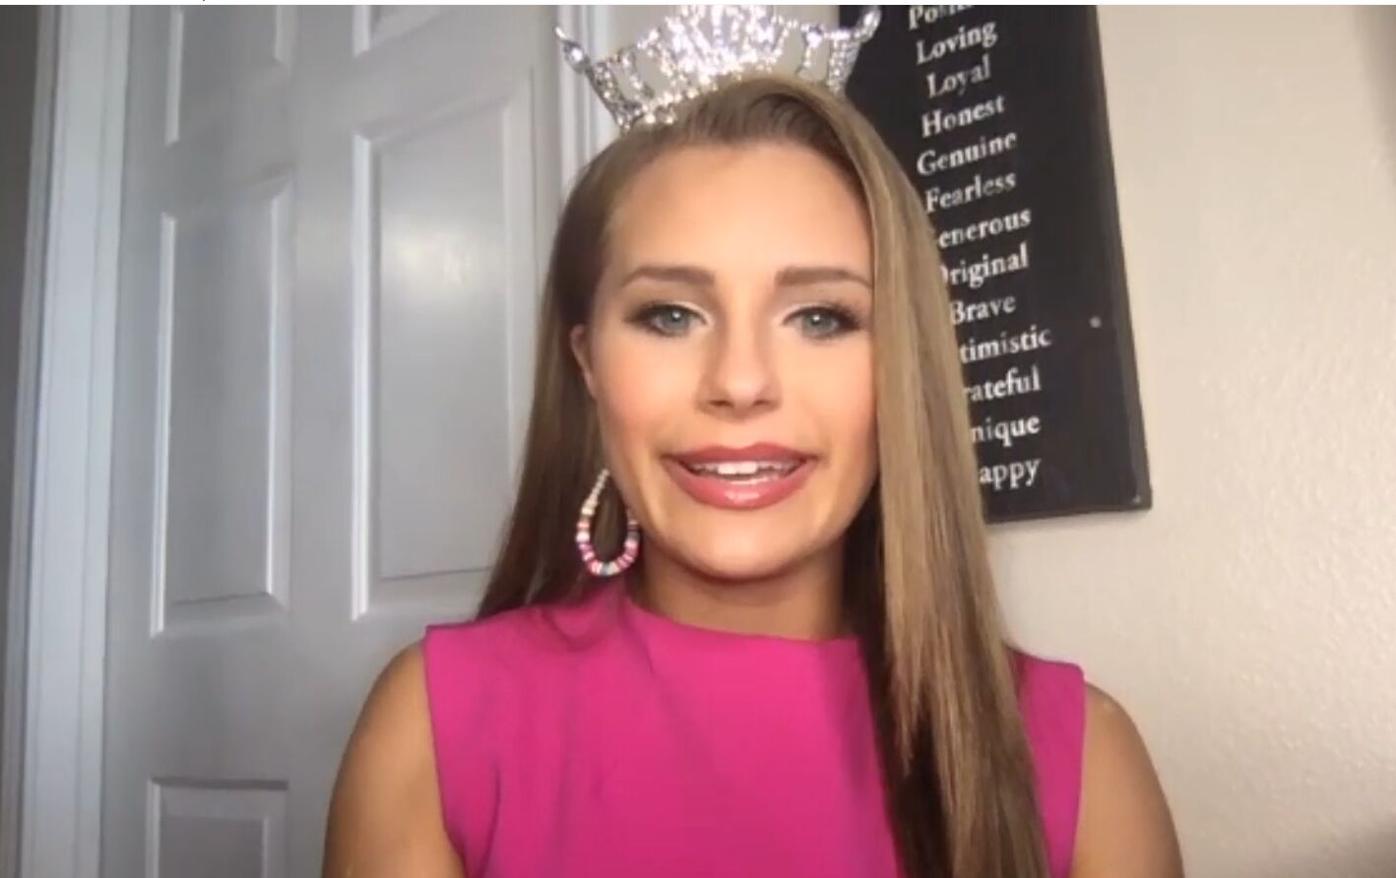 Miss Louisiana Julia Claire Williams on her faith and what comes next